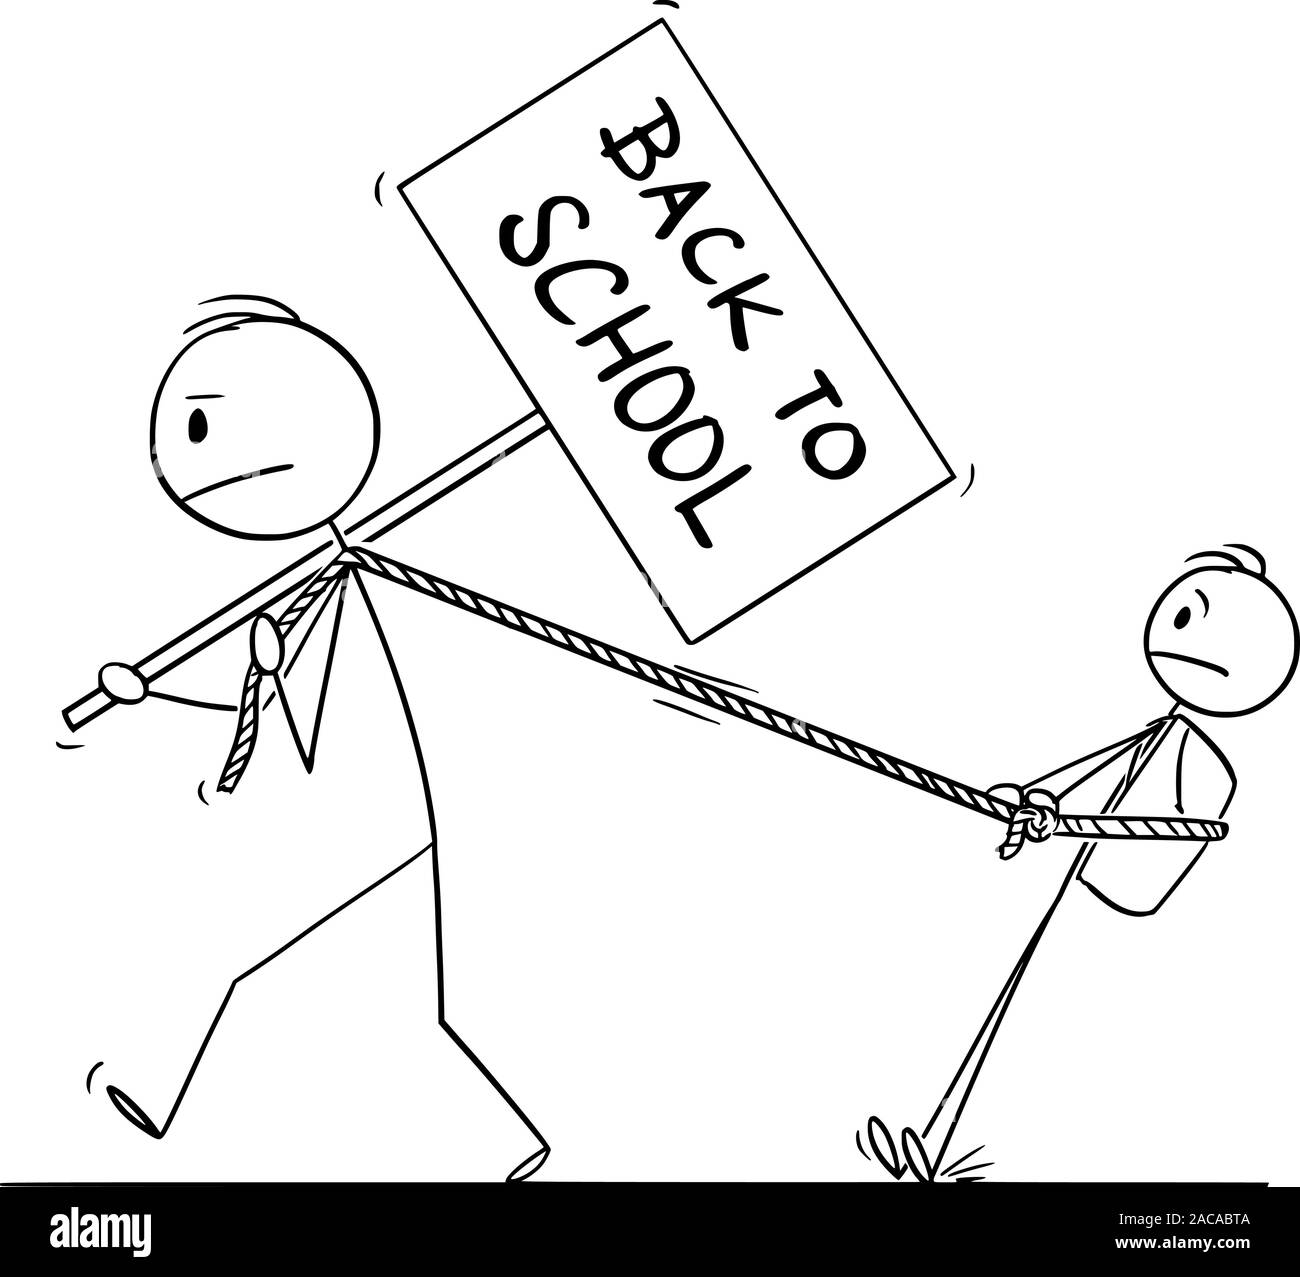 Vector cartoon stick figure drawing conceptual illustration of man dragging his son or boy or schoolboy in school after summer holidays. Stock Vector